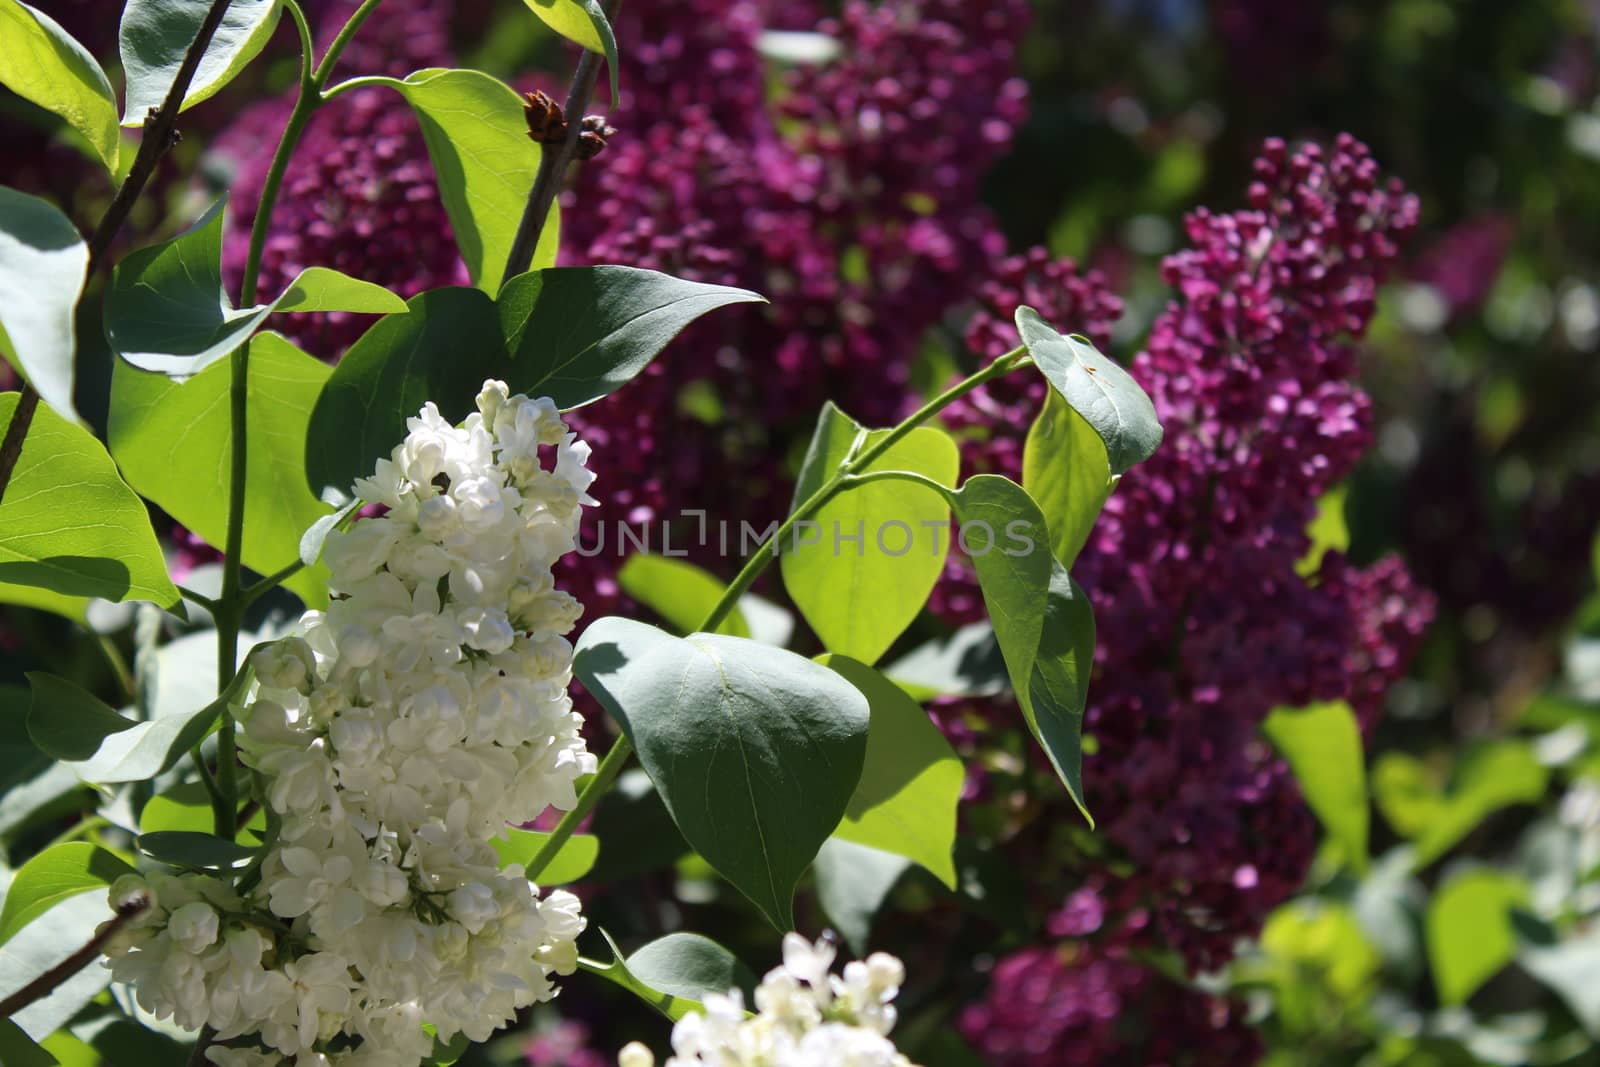 The picture shows lilac in the garden.